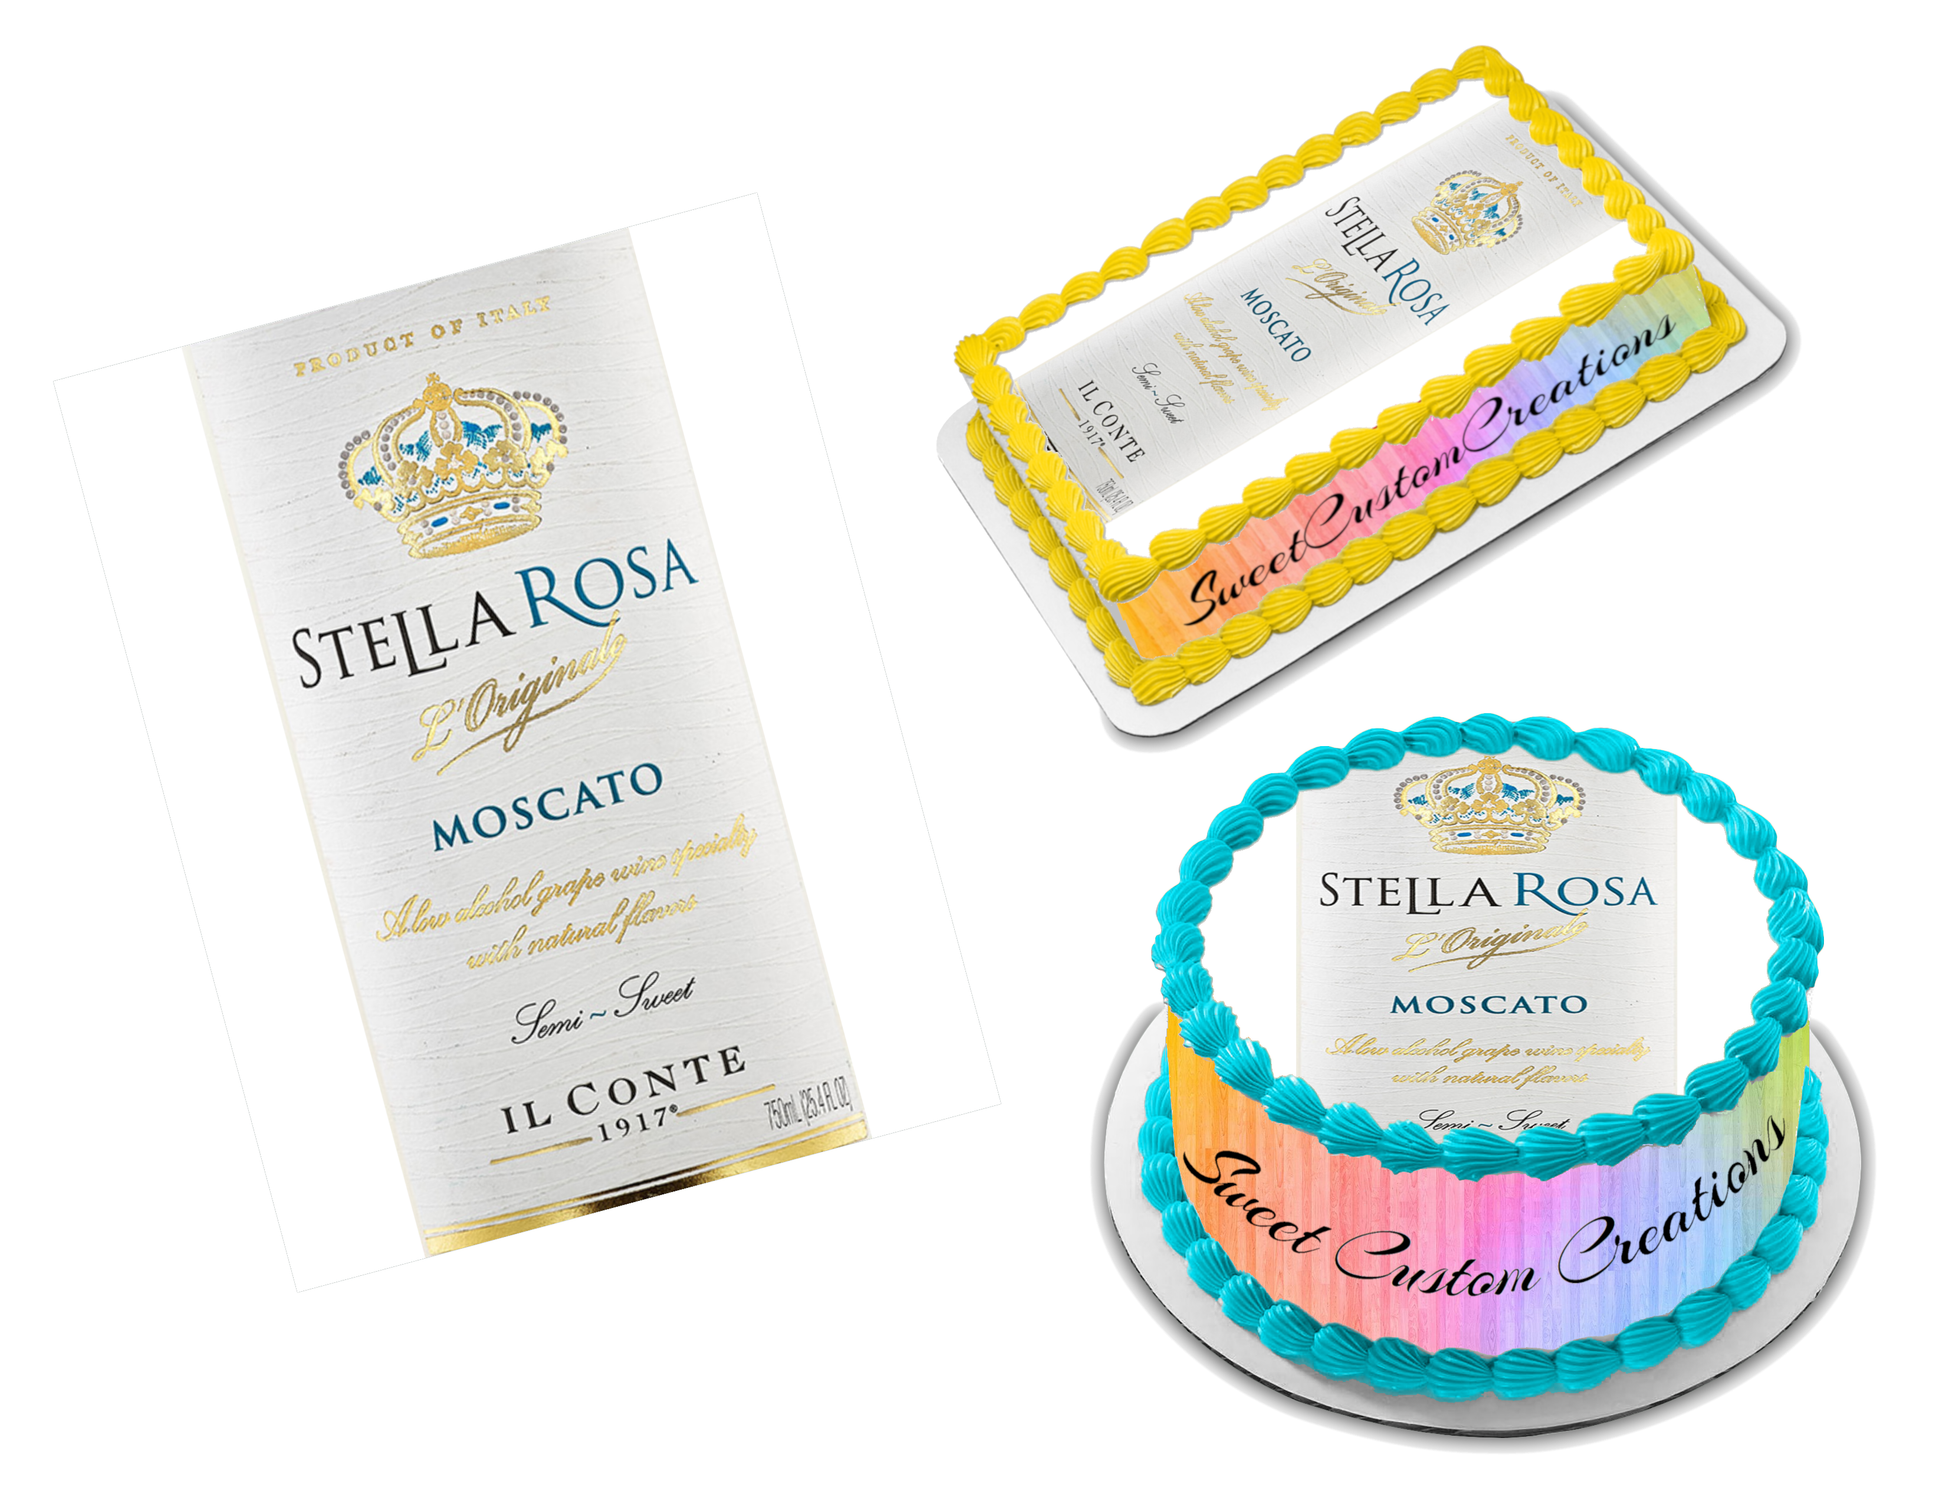 Stella Rosa Moscato Edible Image Frosting Sheet #1 (70+ sizes)